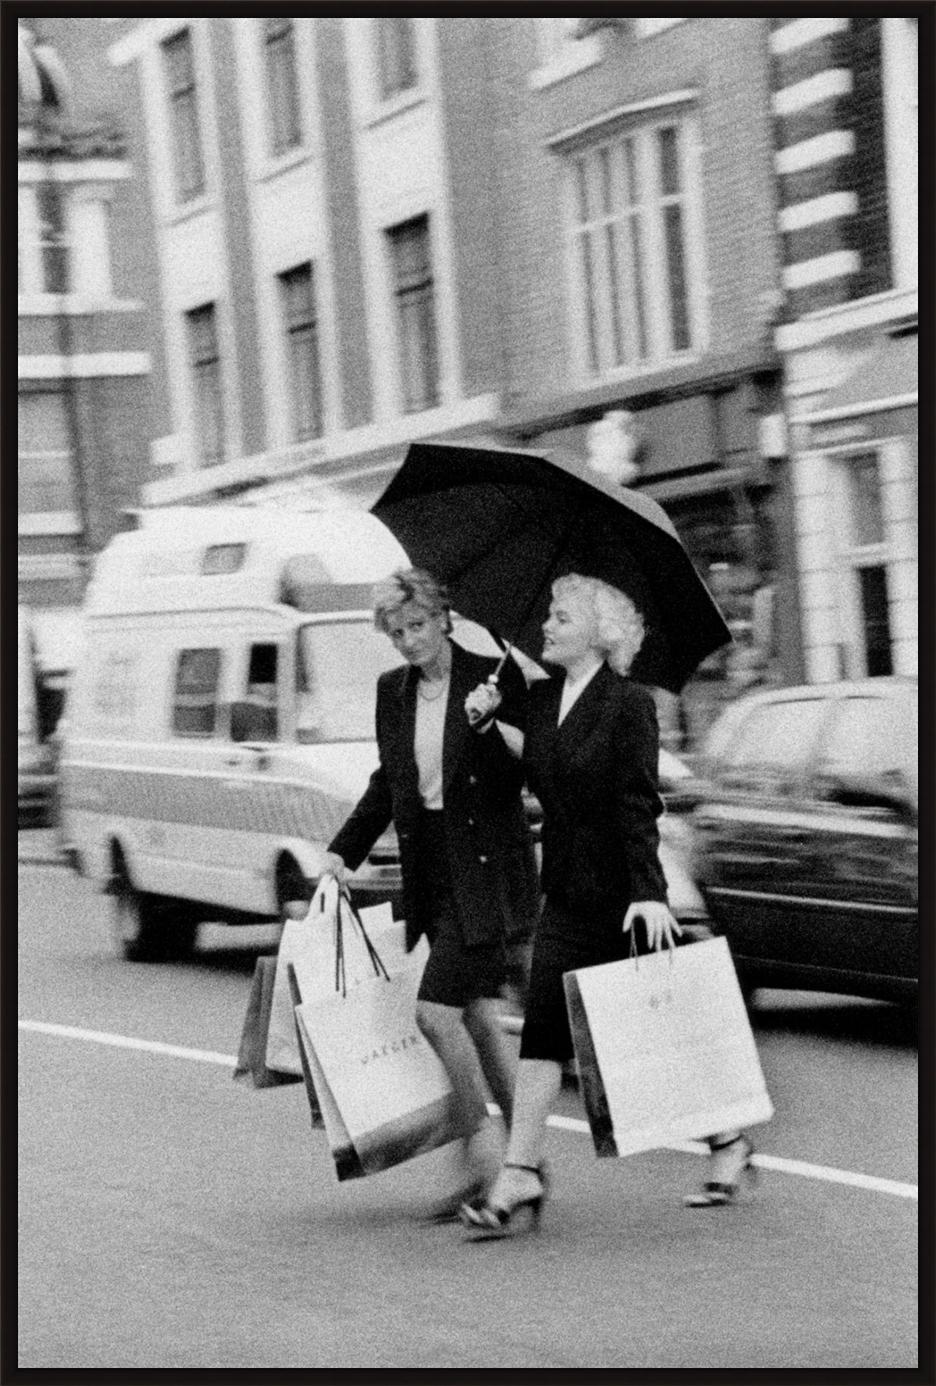 Diana and Marilyn Shopping - Photograph by Alison Jackson